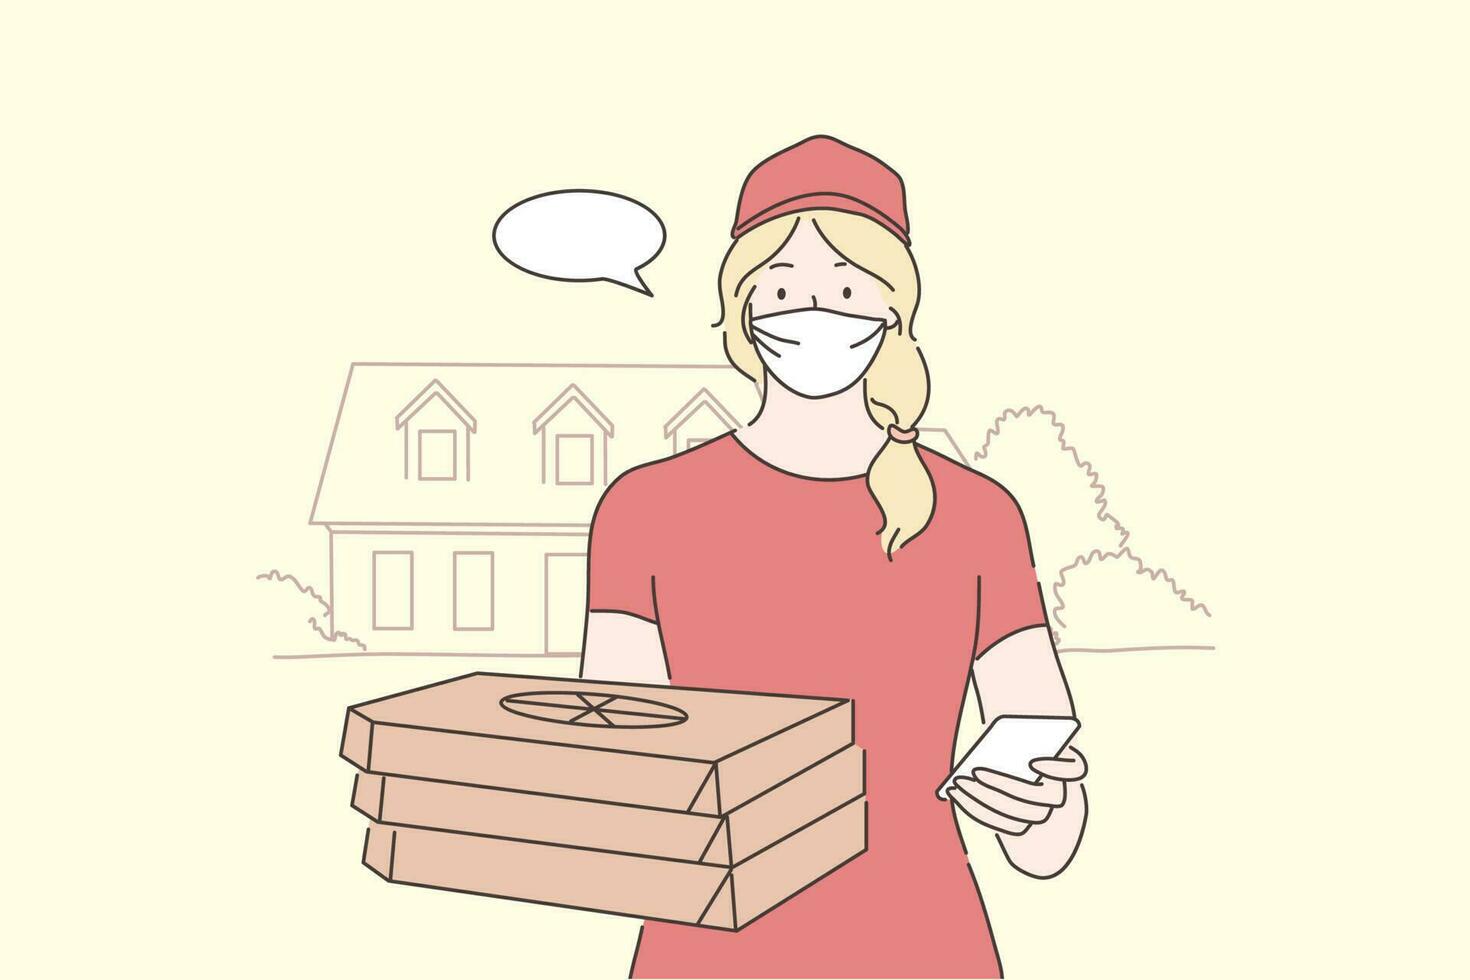 Food delivery, quarantine, coronavirus infection, concept. Young woman supplier cartoon character stands with pizza in medical face mask. Home food delivery on 2019ncov isolation and covid19 desease. vector